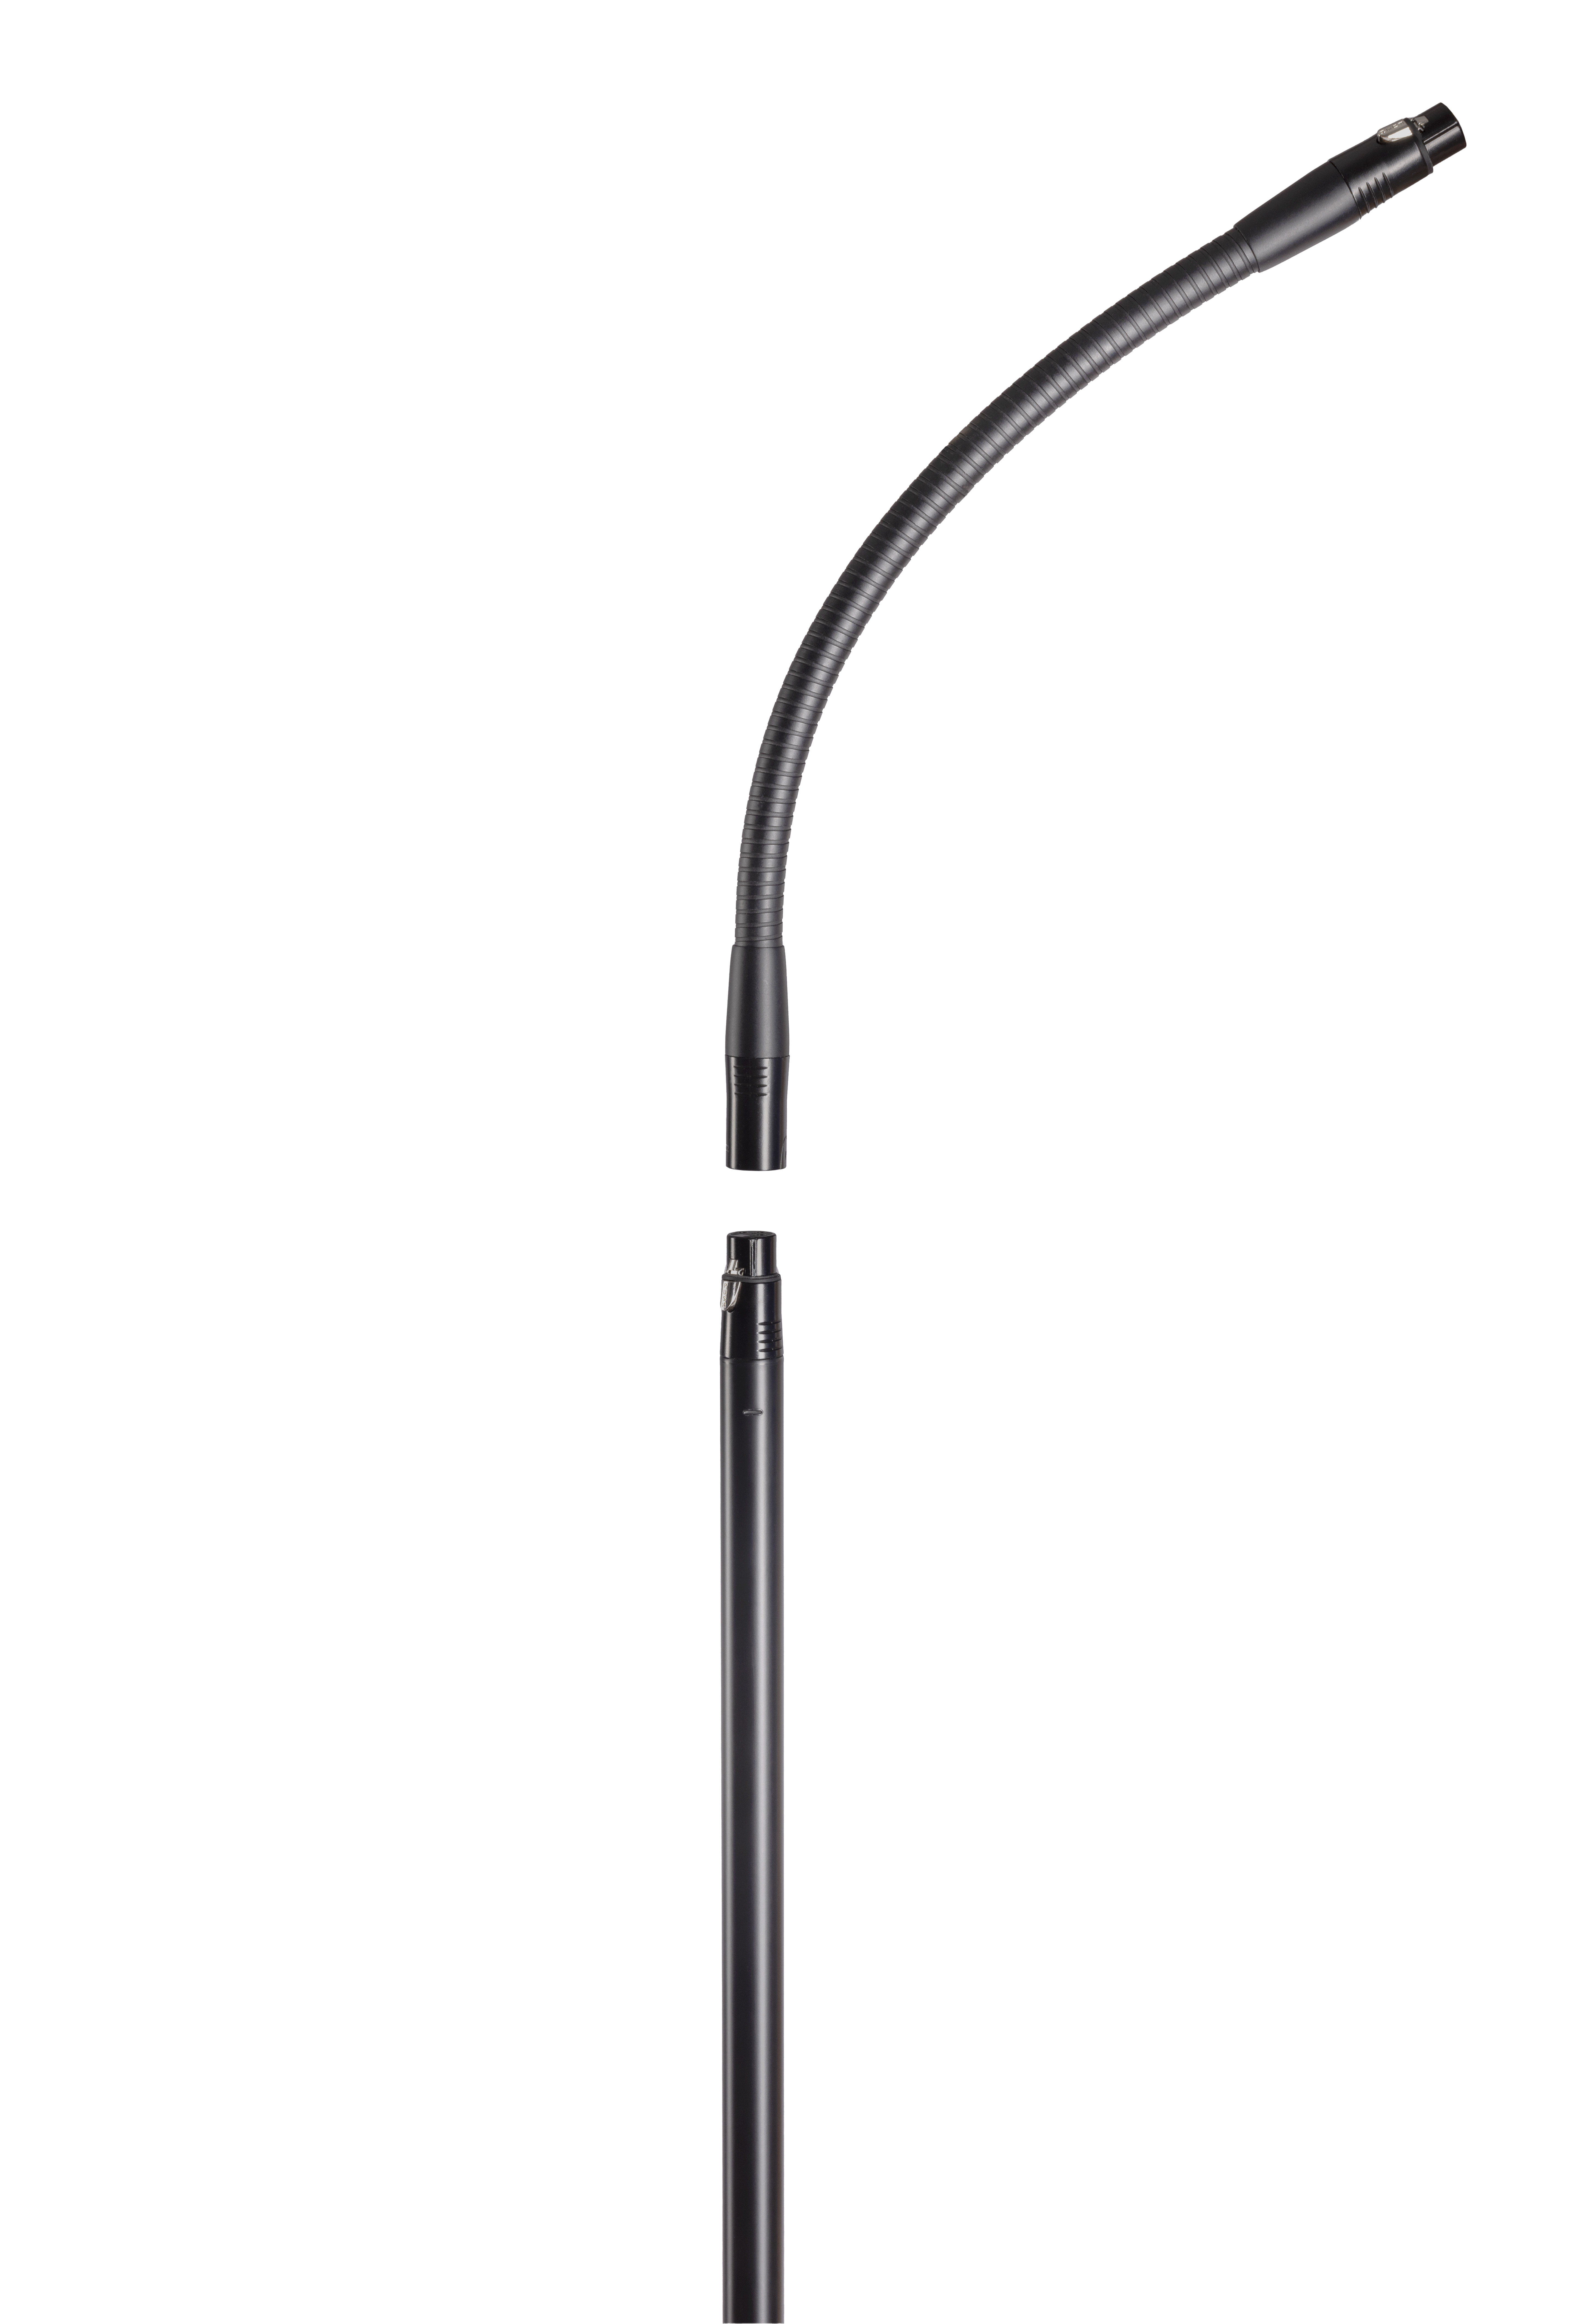 XLR Microphone stand with gooseneck